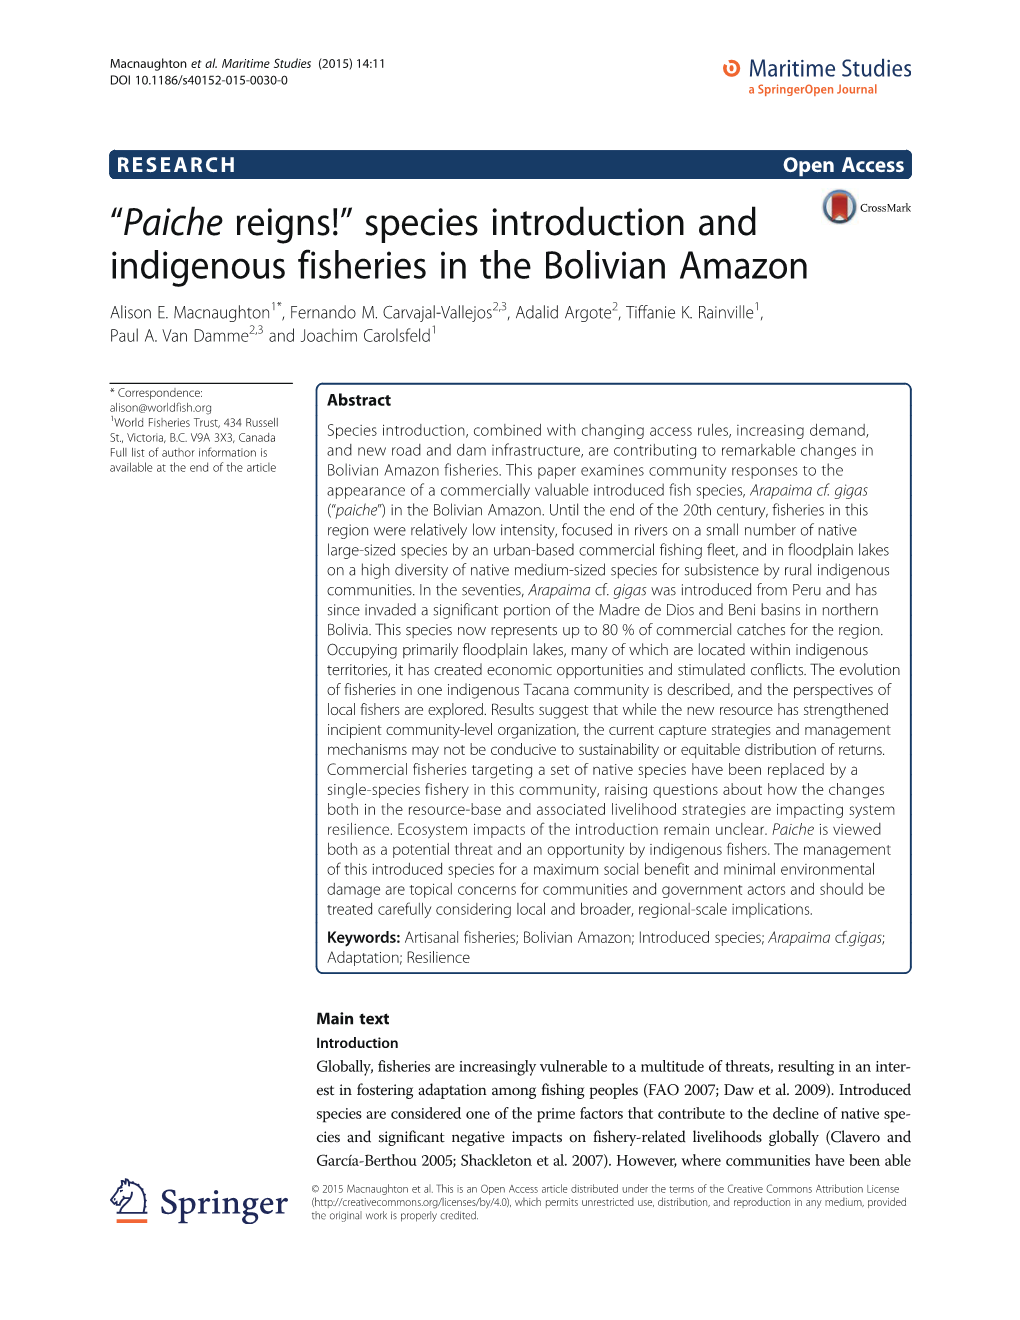 Species Introduction and Indigenous Fisheries in the Bolivian Amazon Alison E